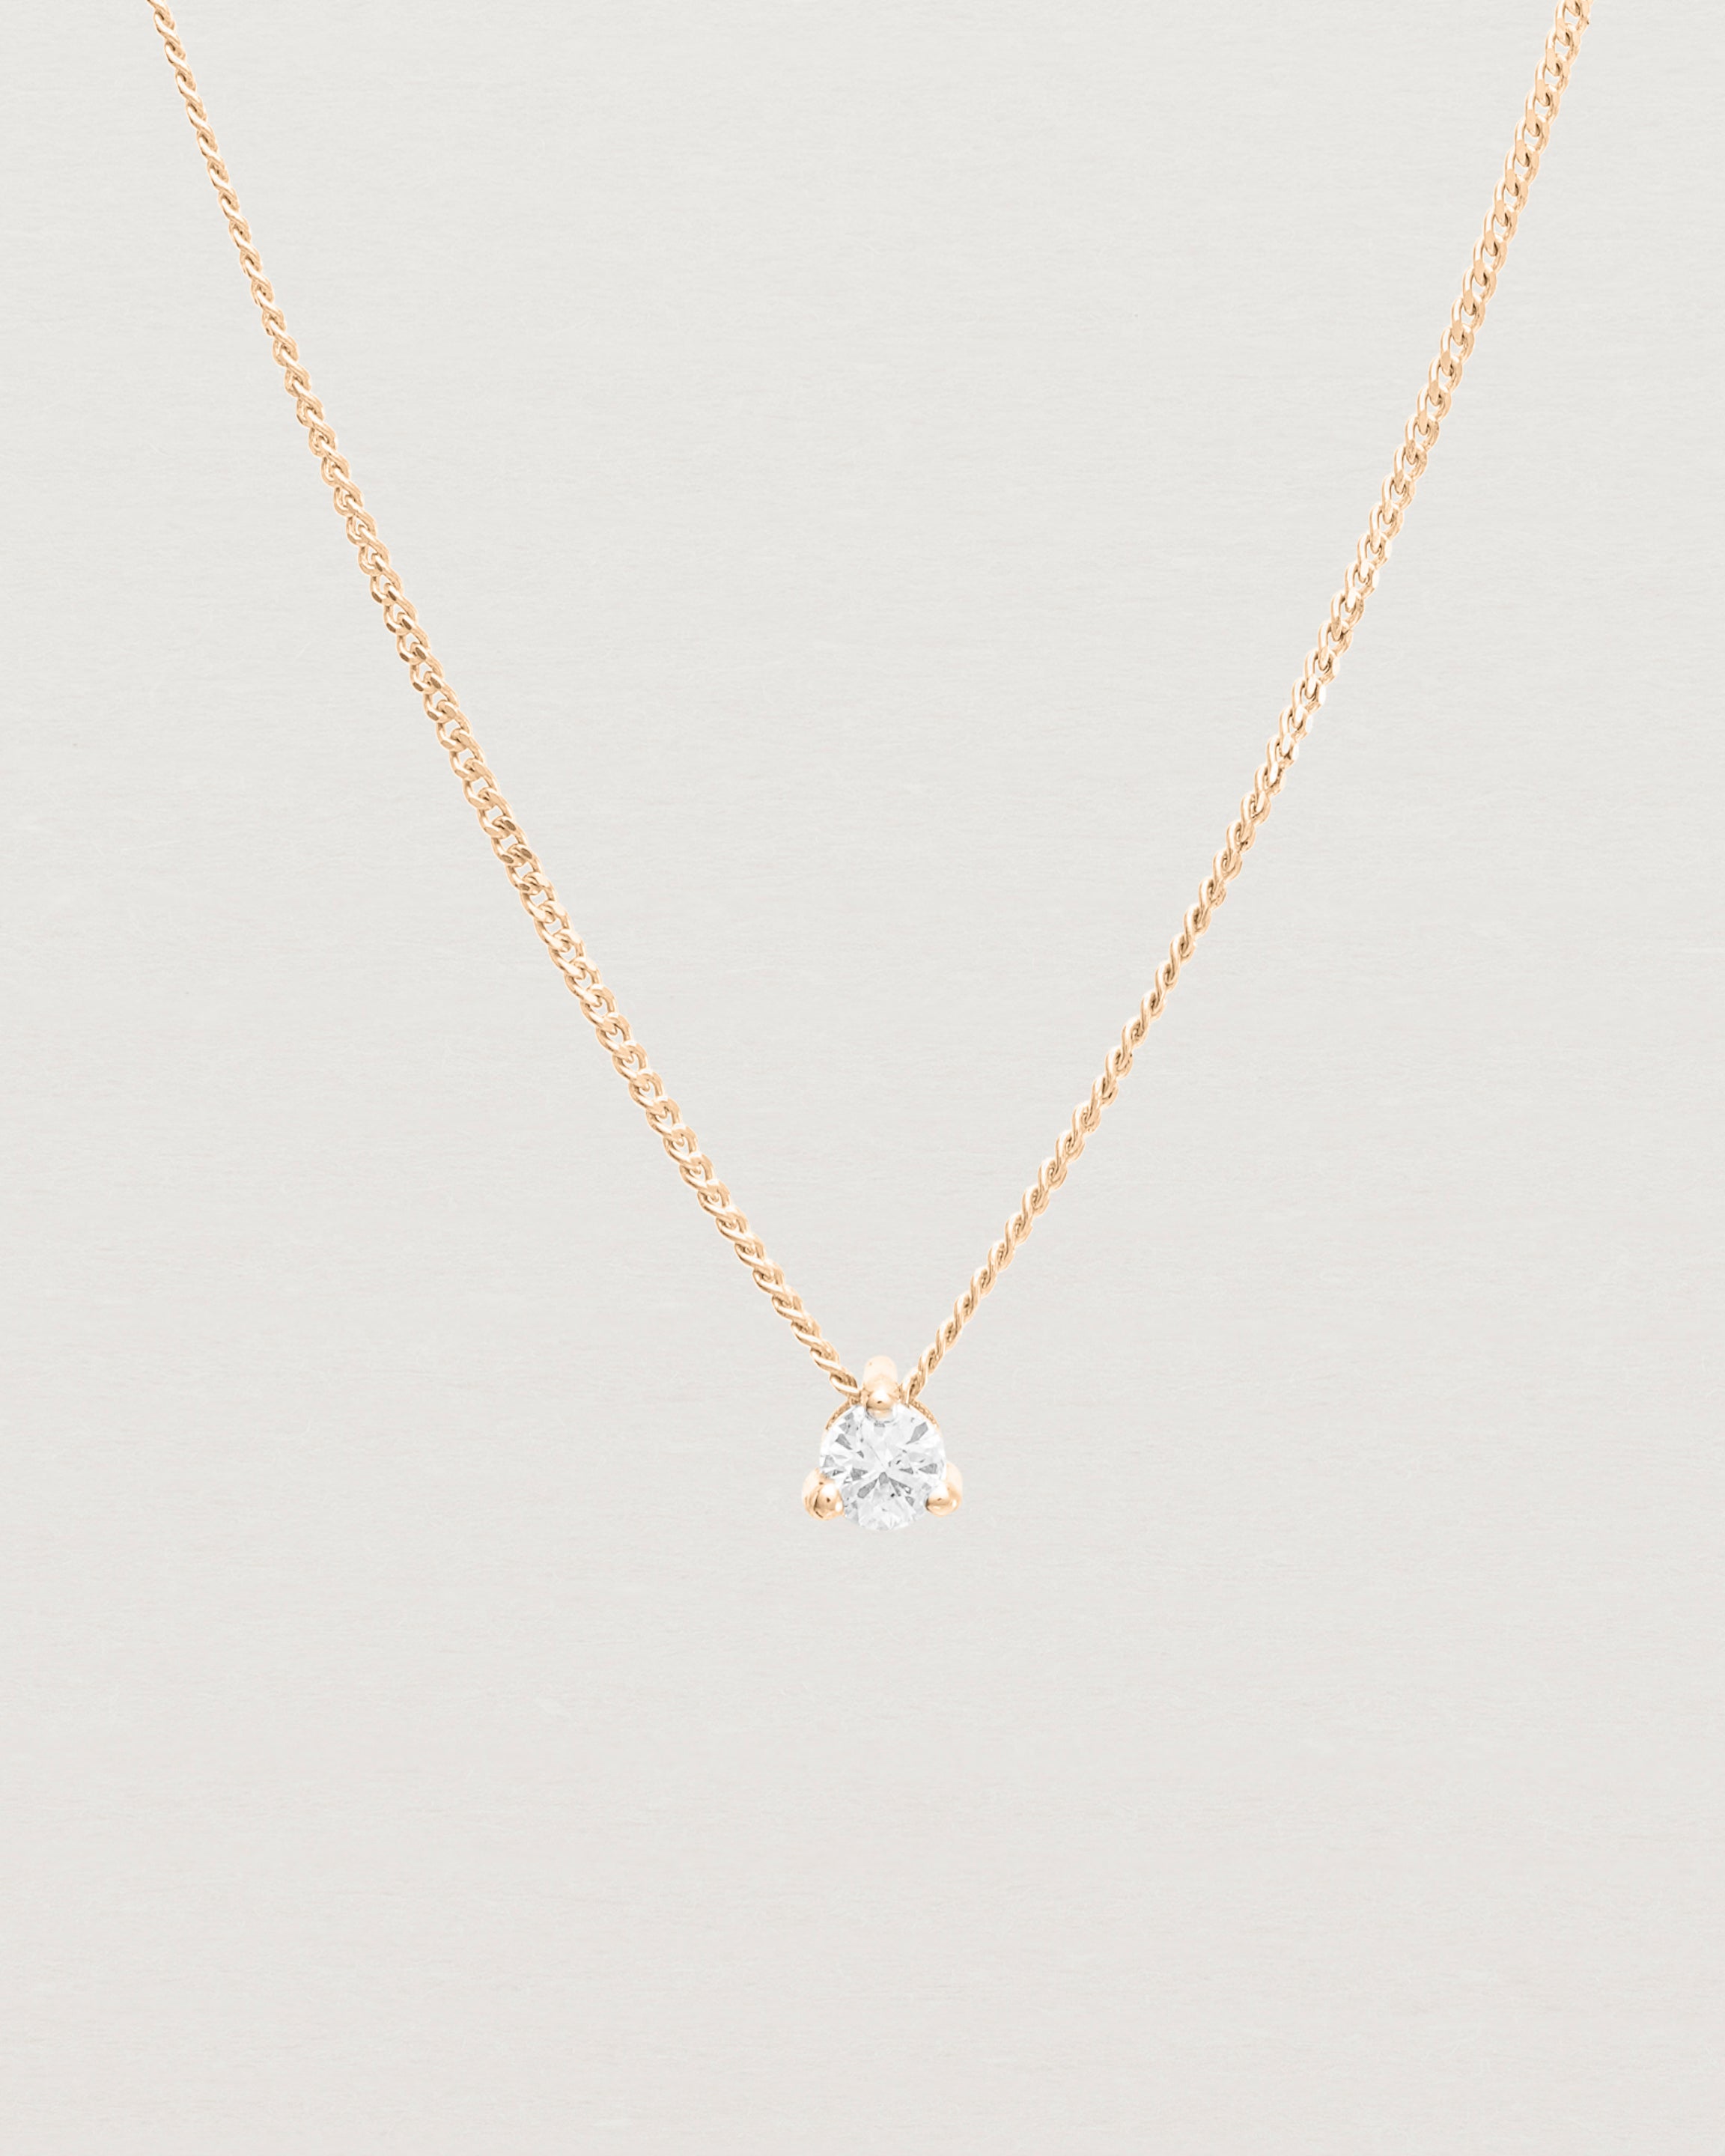 Front view of the Aiona Slider Necklace | Old Cut Diamond | Rose Gold.